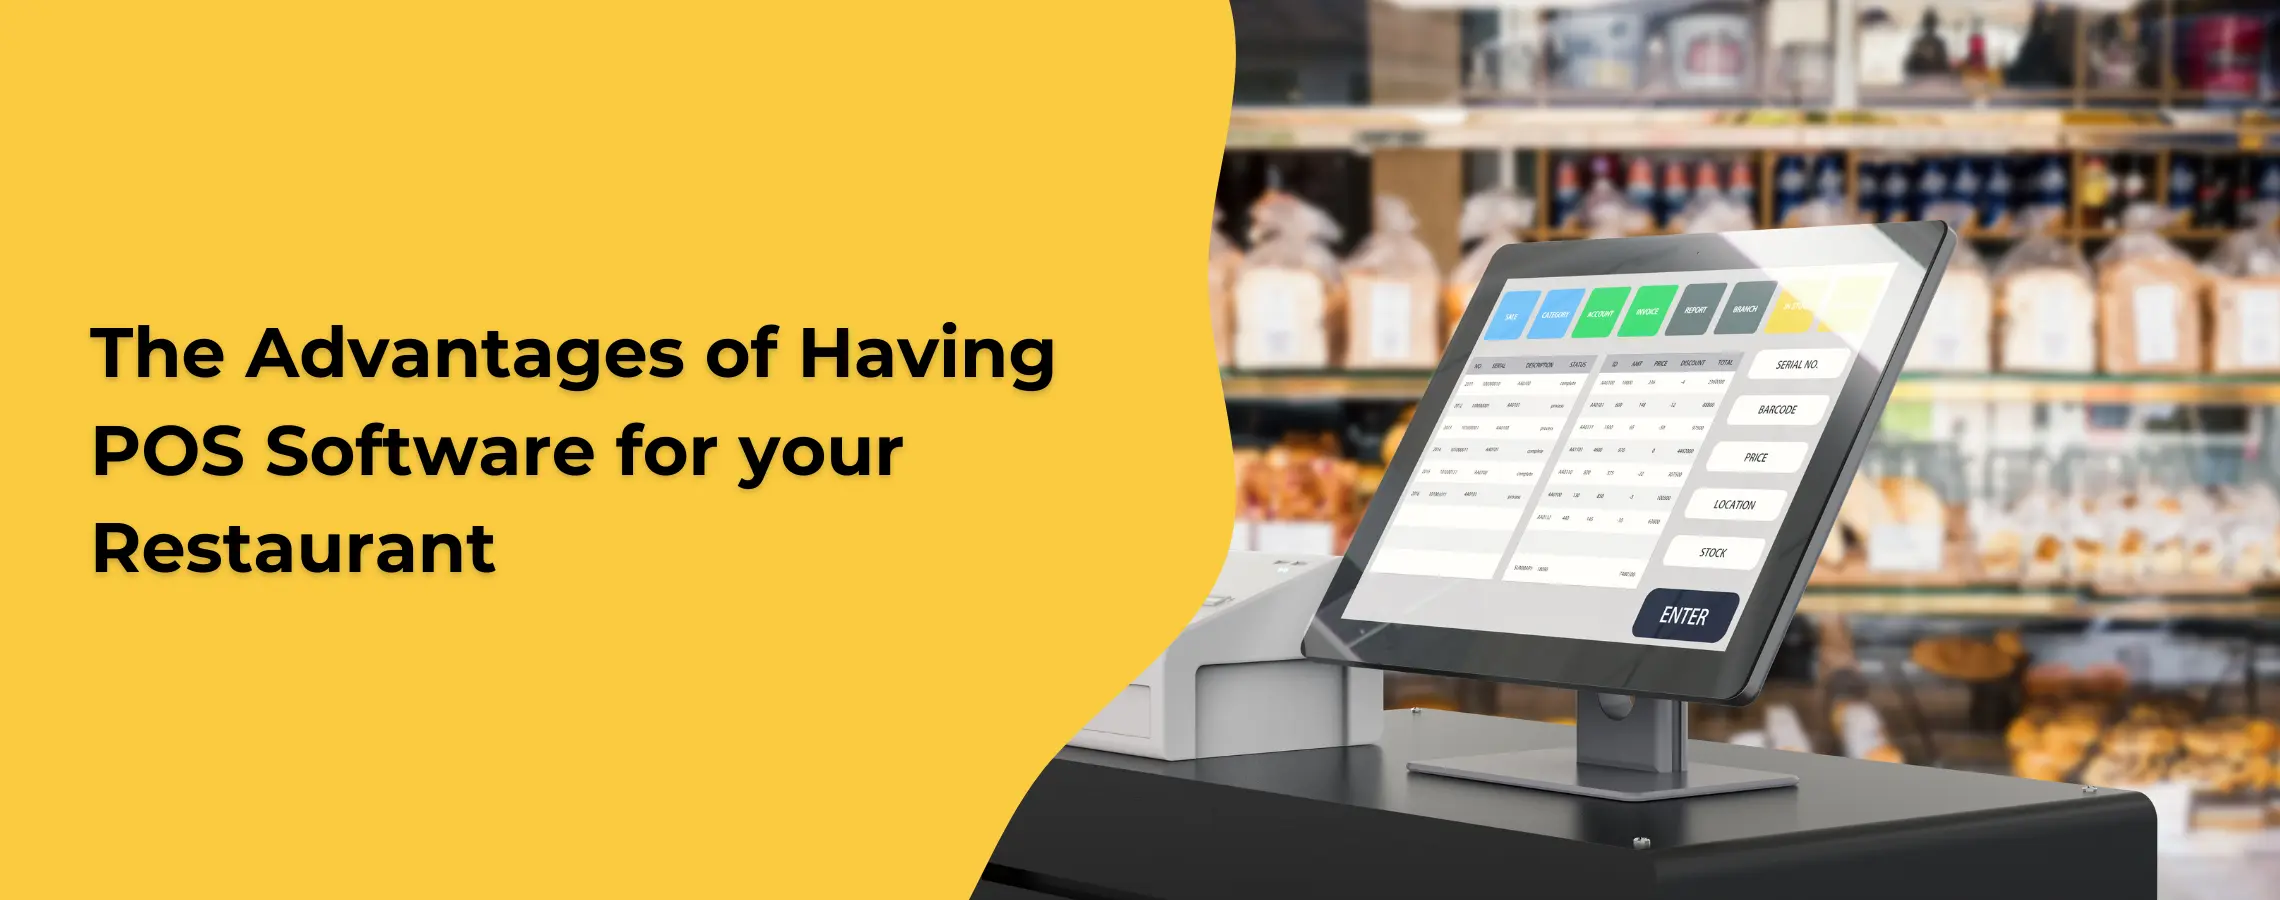 The advantages of having POS software for your restaurant